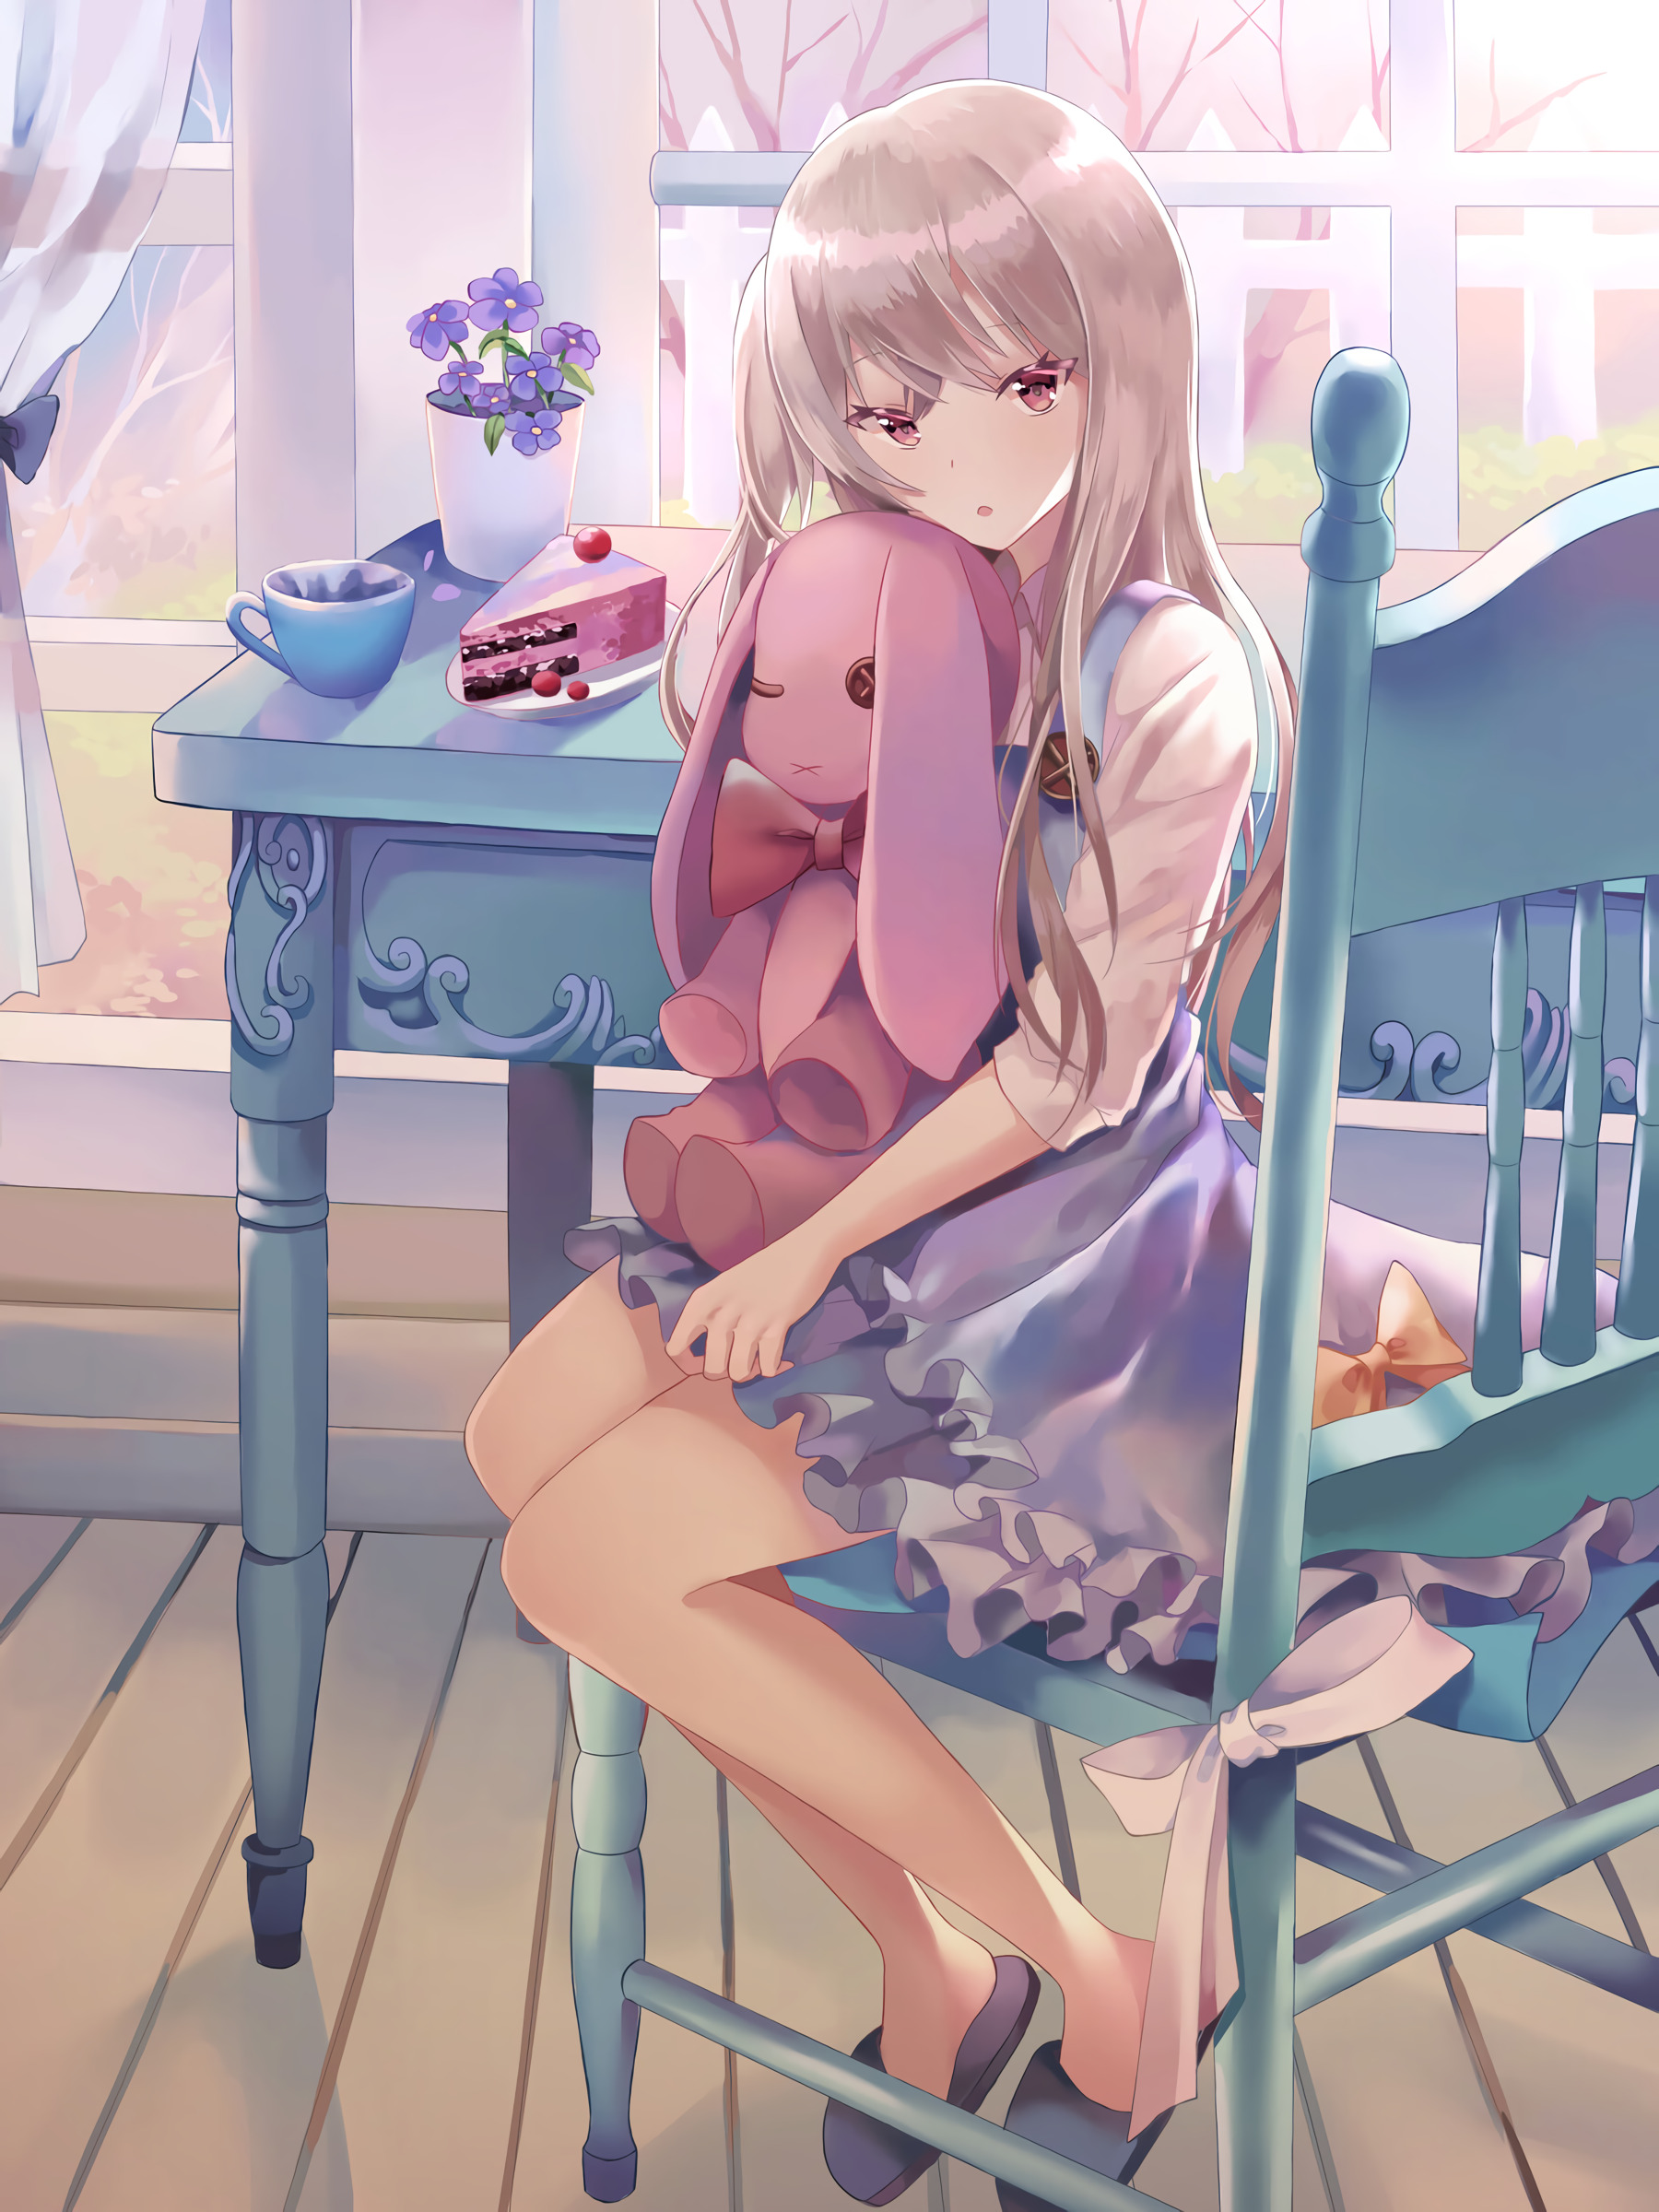 anime, girl, toy, cake, attire, outfit